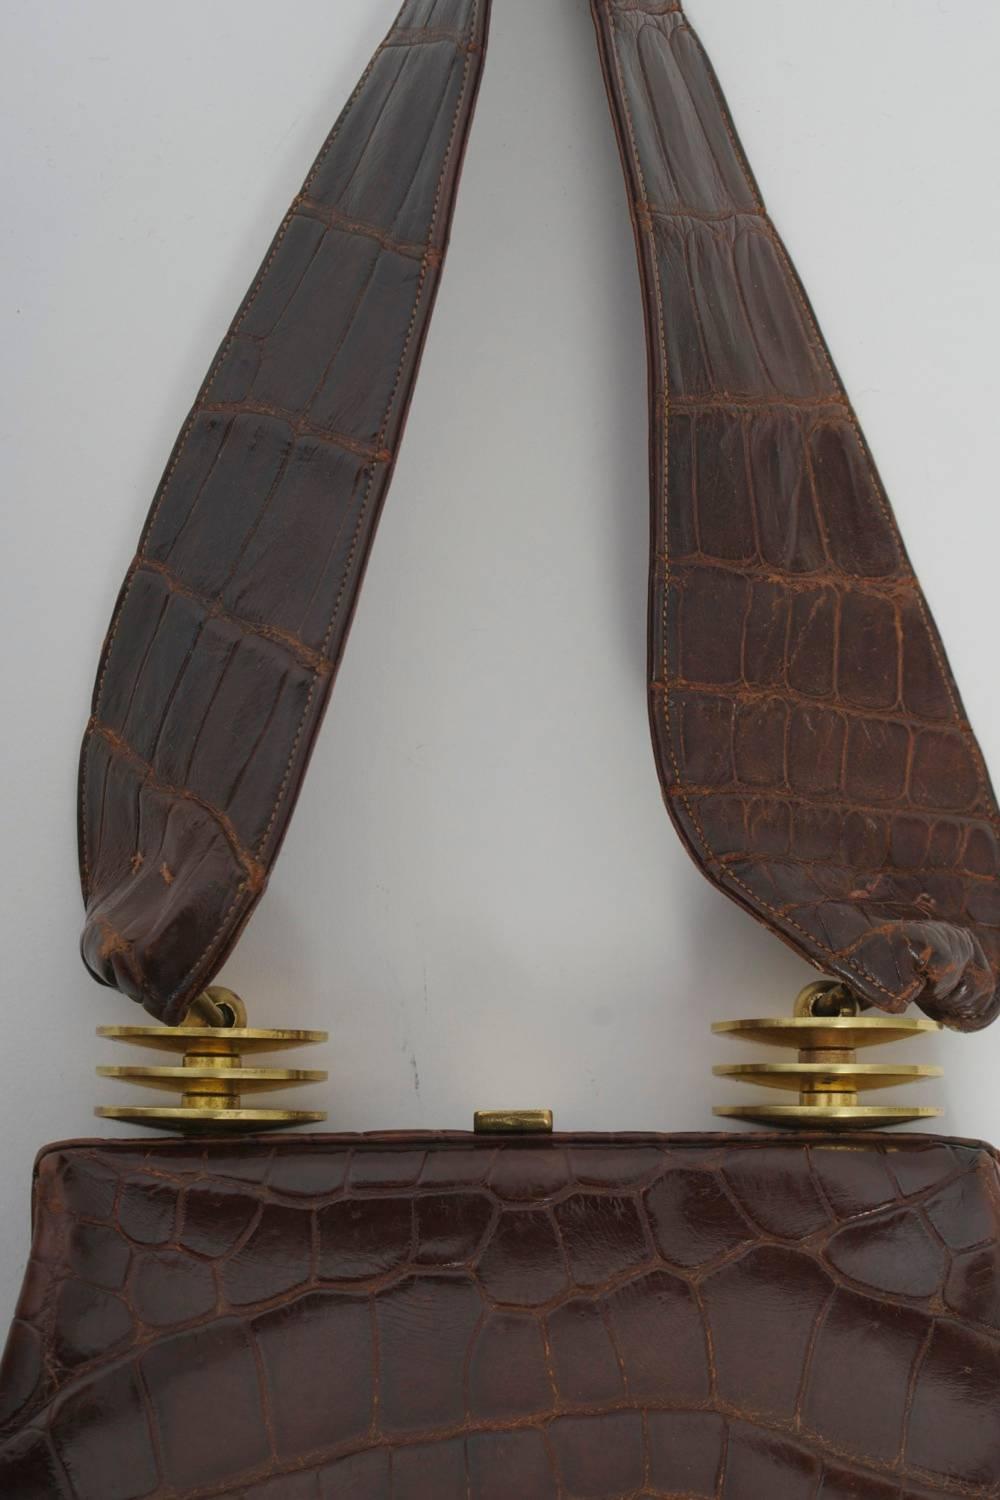 An early and rare example of one of the most respected American handbag designers, Harry Rosenfeld, whose firm created innovative and luxurious designs from the 1930s-1970s. Of brown alligator, this handbag has an unusual ovoid shape and features